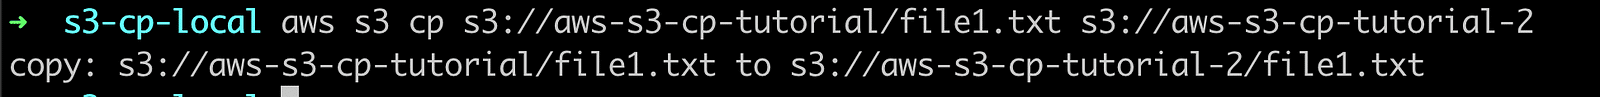 aws s3 cp command